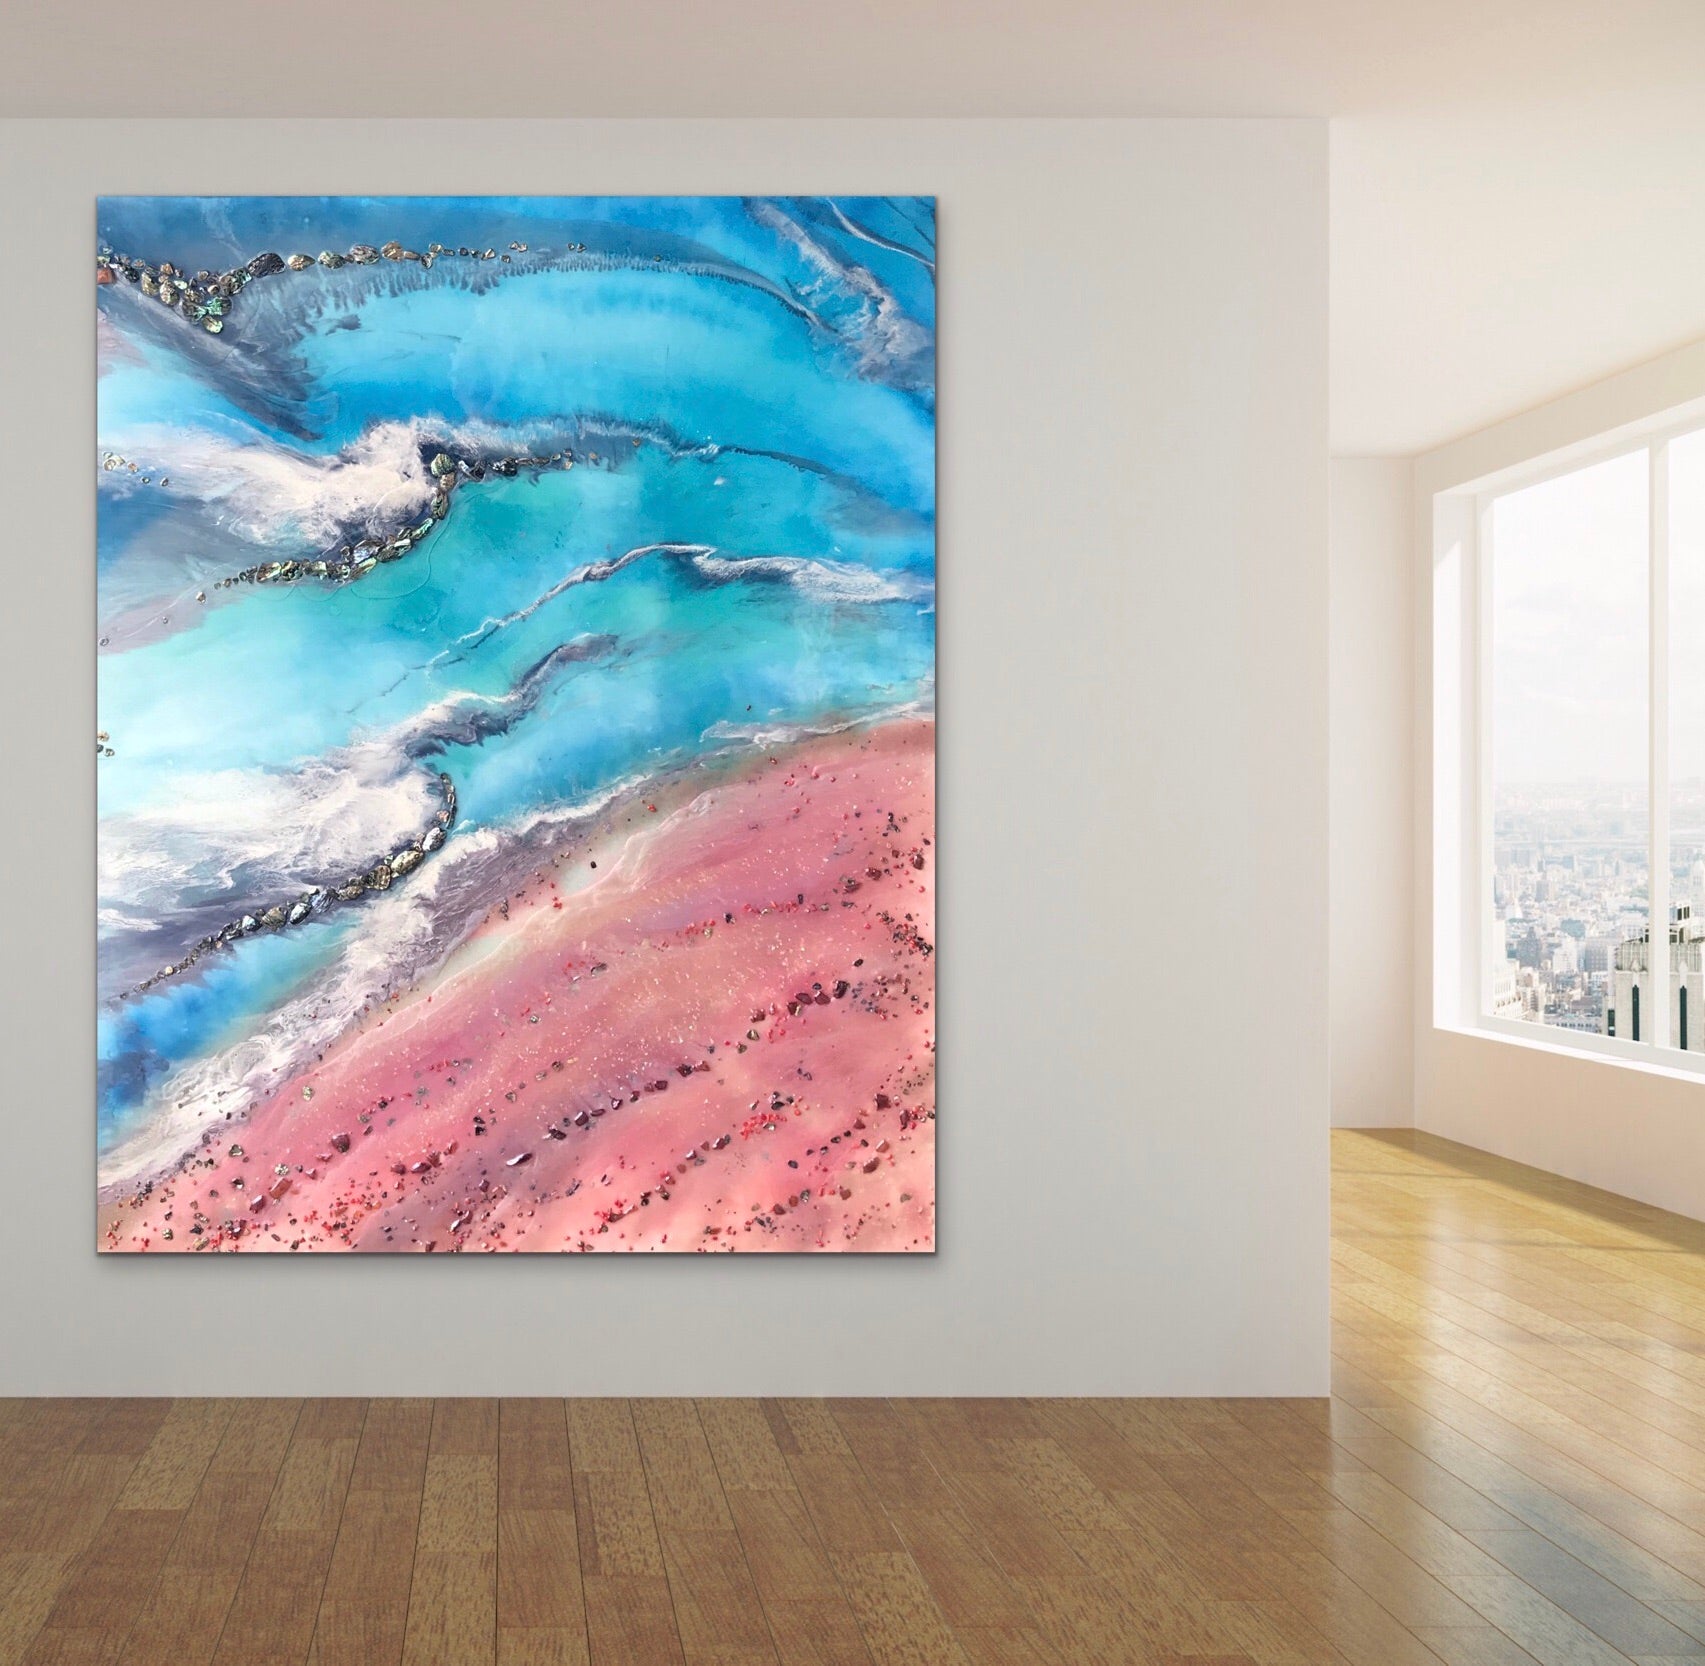 Teal and Pink Ocean Painting. Abstract Seascape Resin Artwork 7 Azure Coastline. Ocean. Original with Abalone Shells Coral 120x150cm.